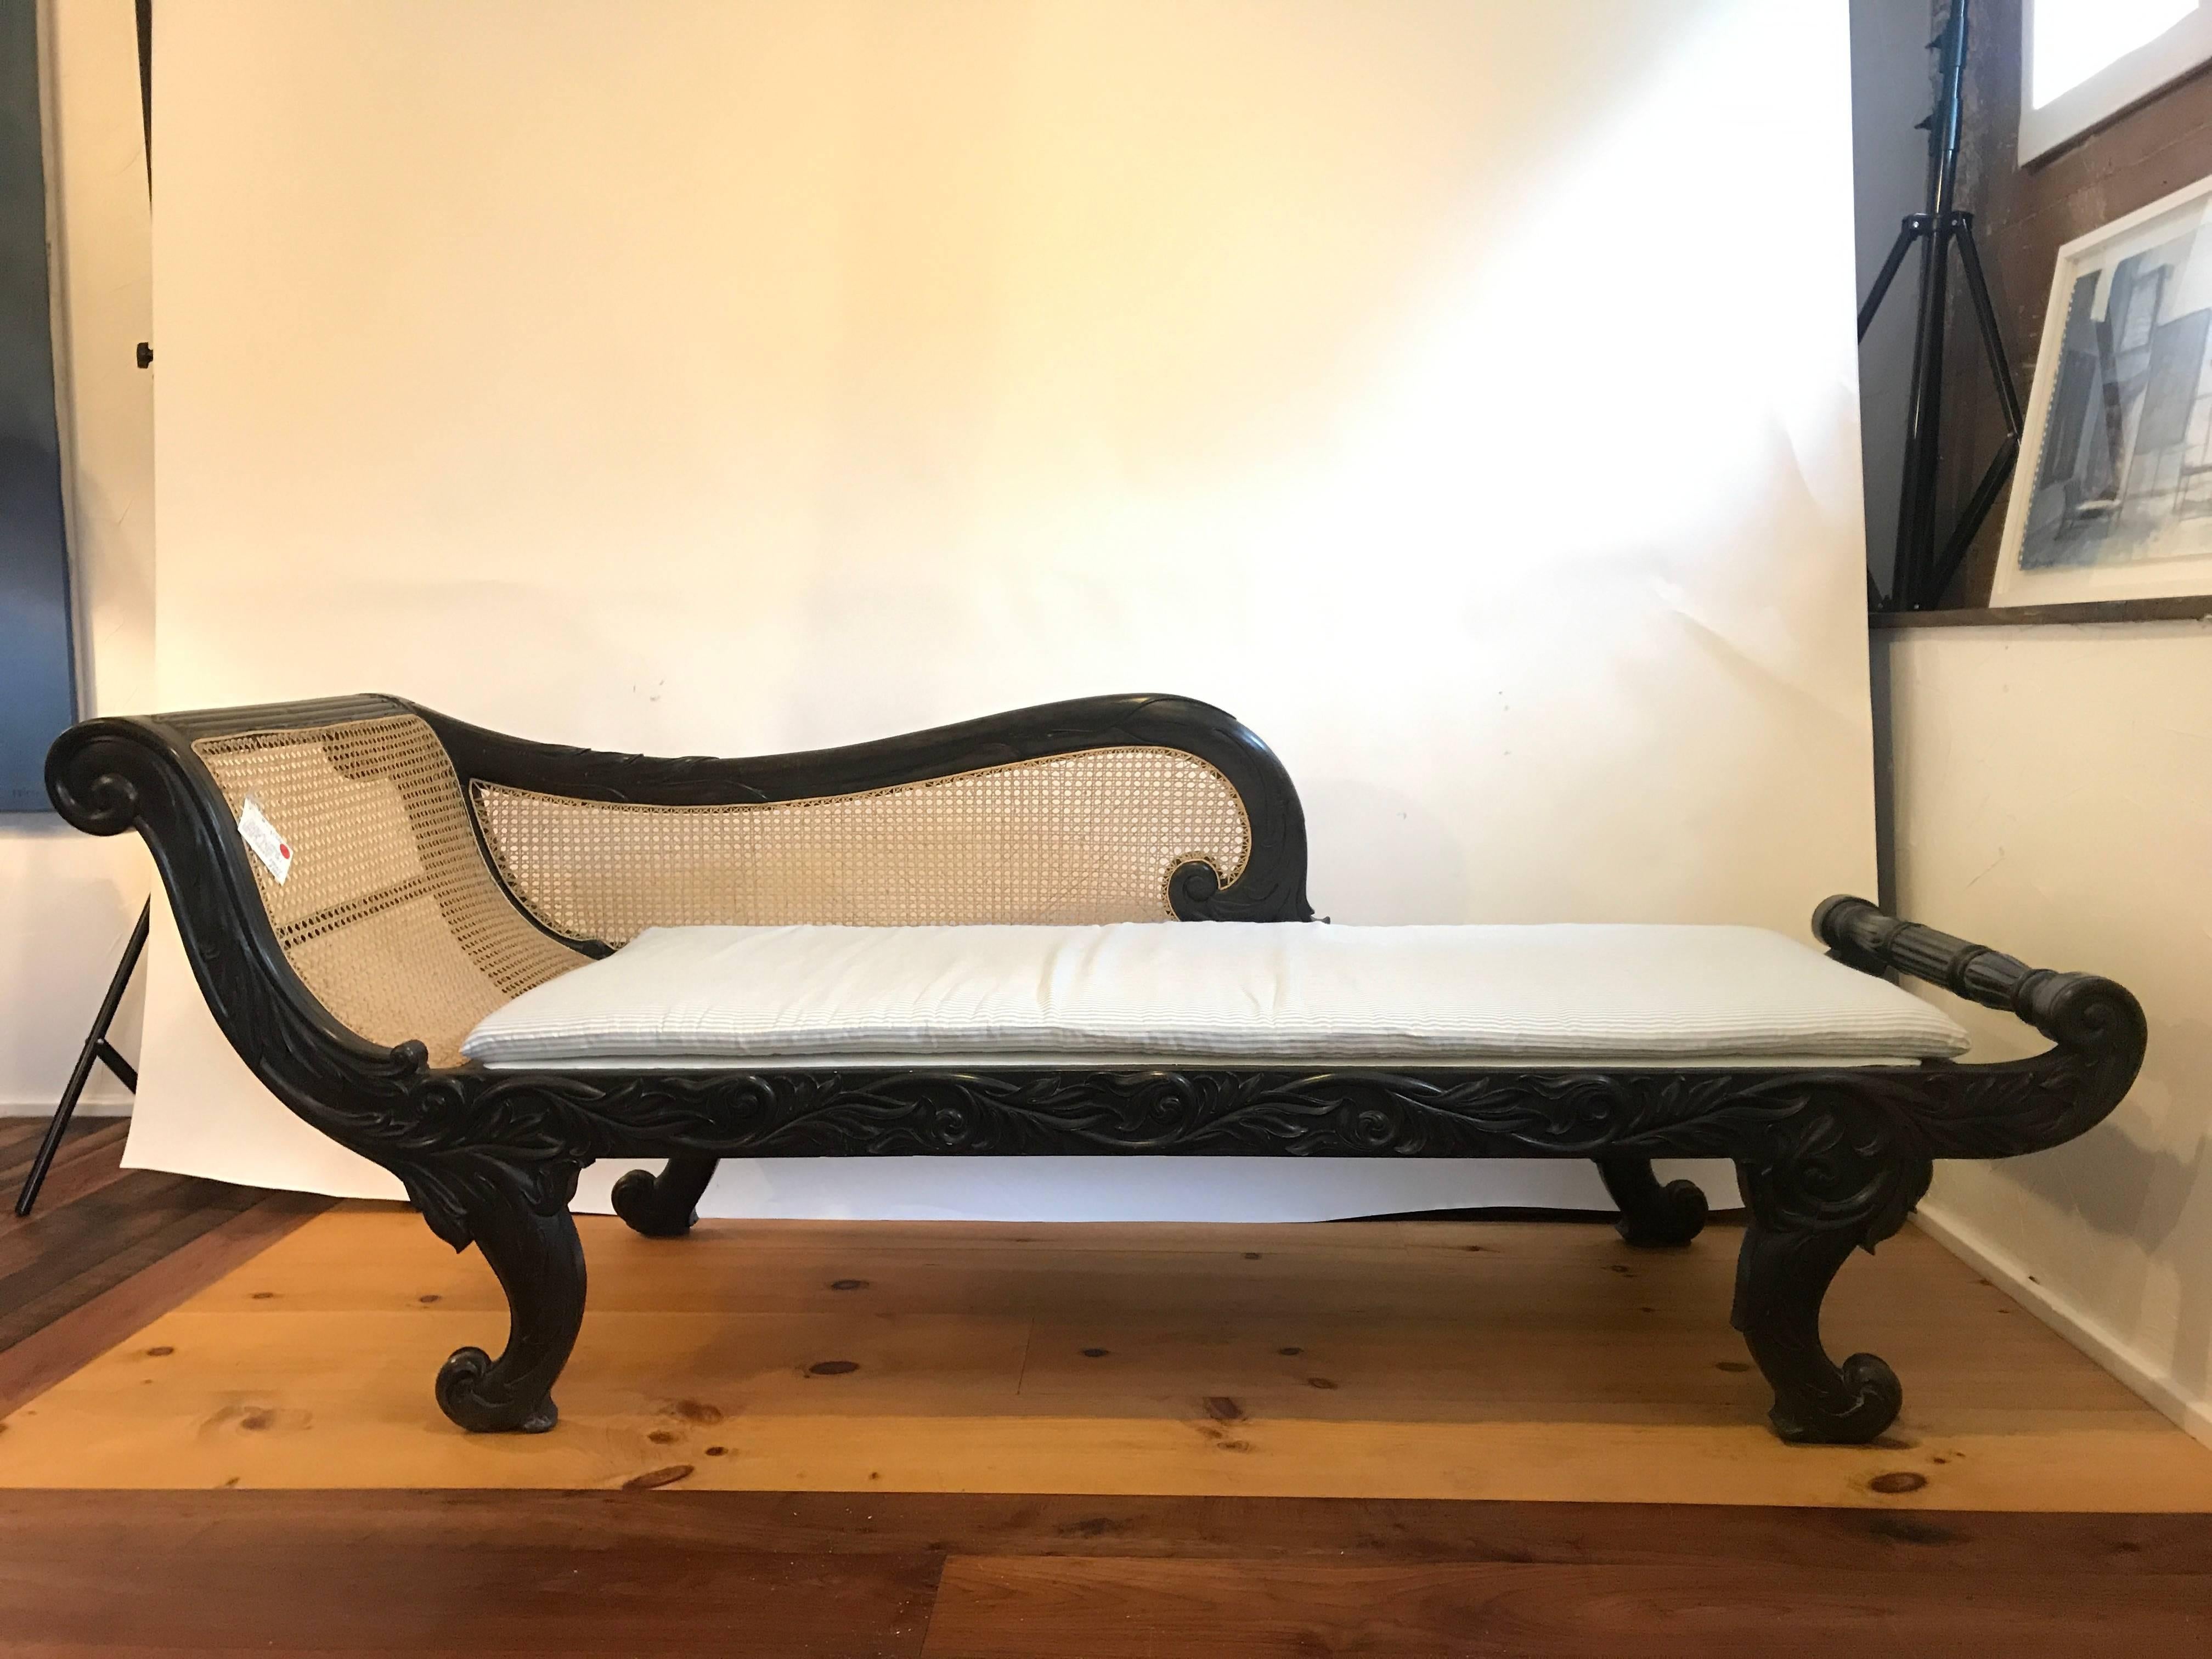 British Colonial chaise lounge from Sri Lanka, circa 1910
Solid carved ebony with caned back and newly upholstered seat in white linen, with a blue and white ticking stripe cushion.

Measures: 28